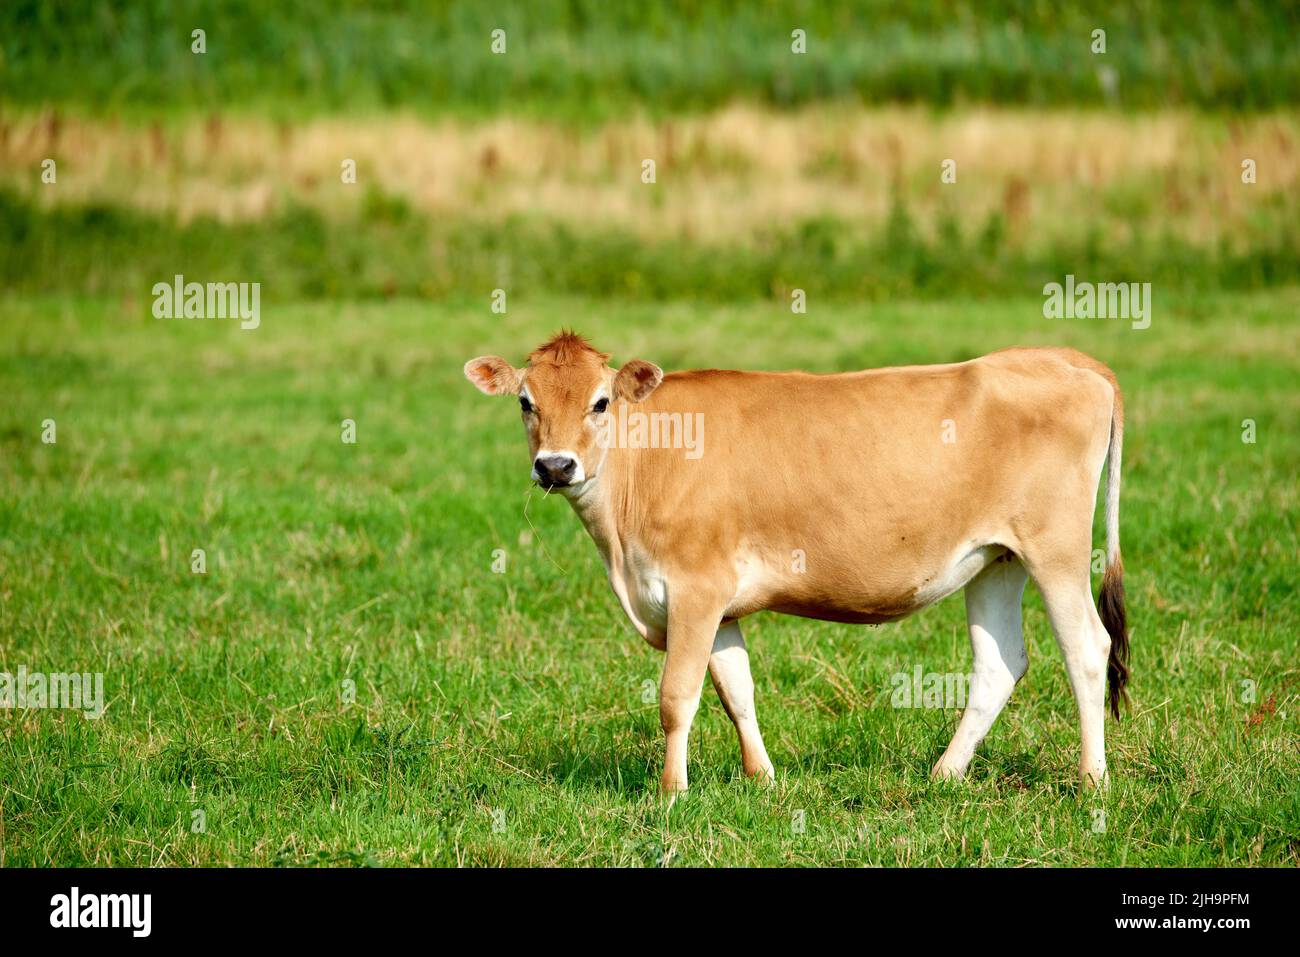 Cow on a farm for meat industry and the production of food for human consumption. Beef is a form of protein that helps maintain good health. Poultry Stock Photo